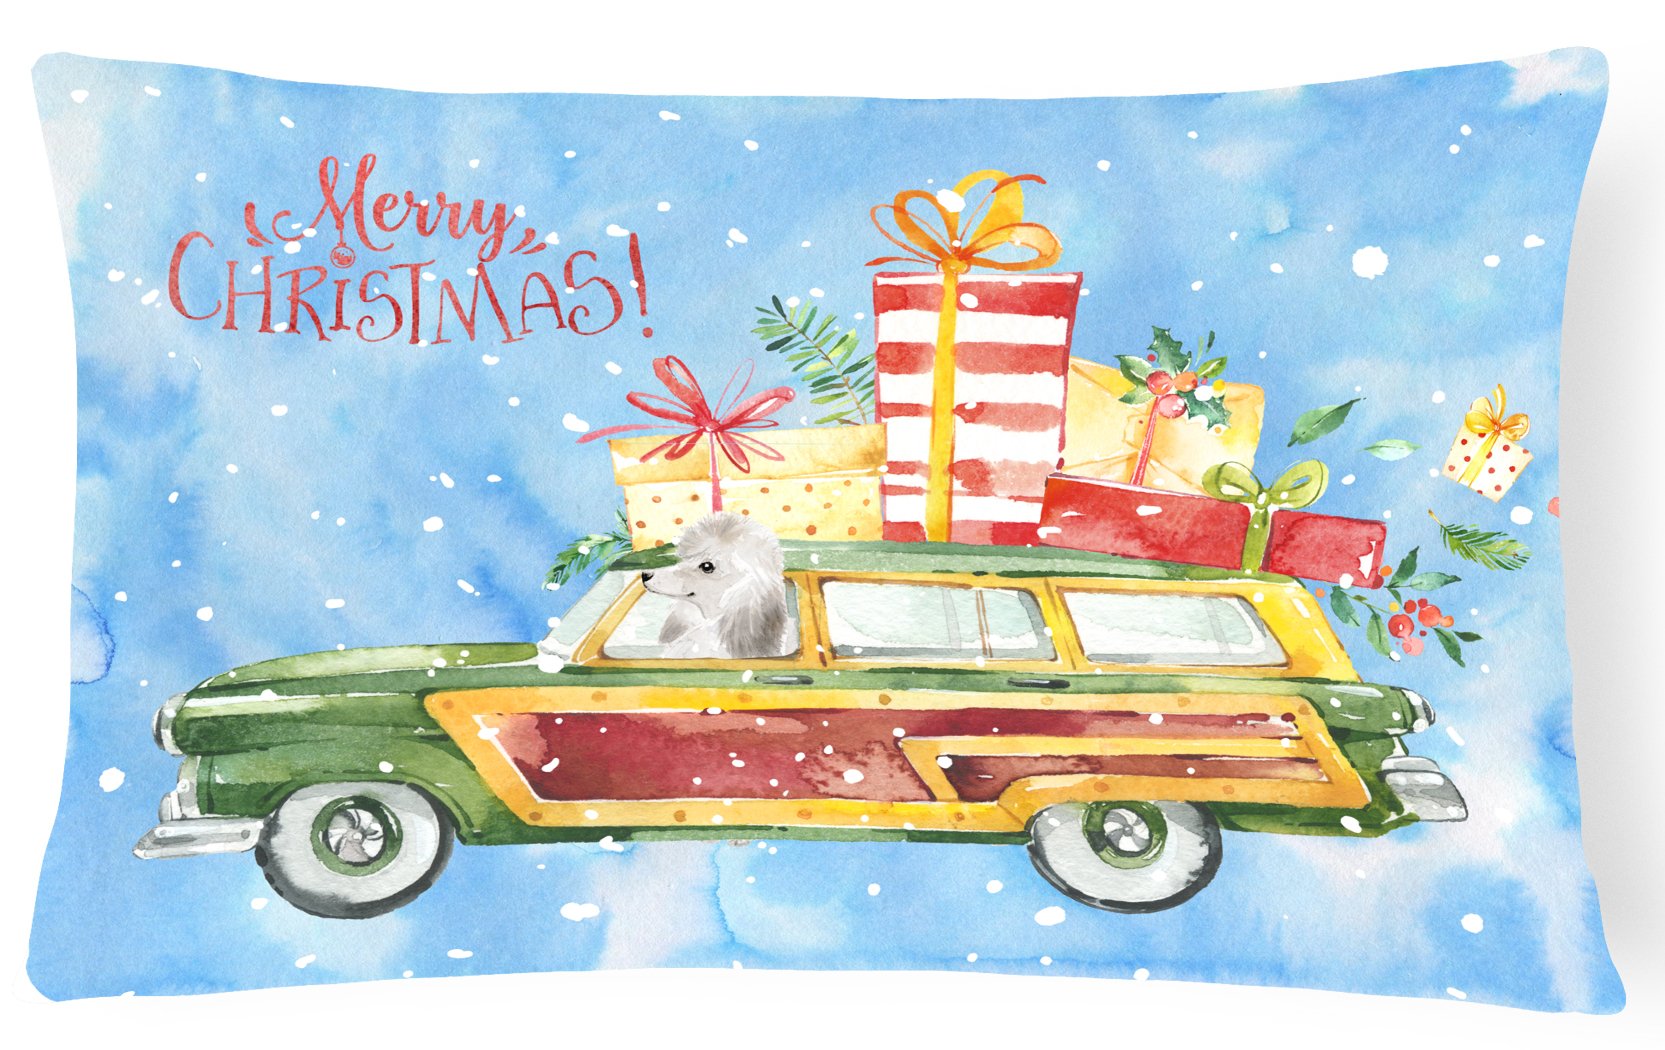 Merry Christmas White Poodle Canvas Fabric Decorative Pillow CK2466PW1216 by Caroline's Treasures